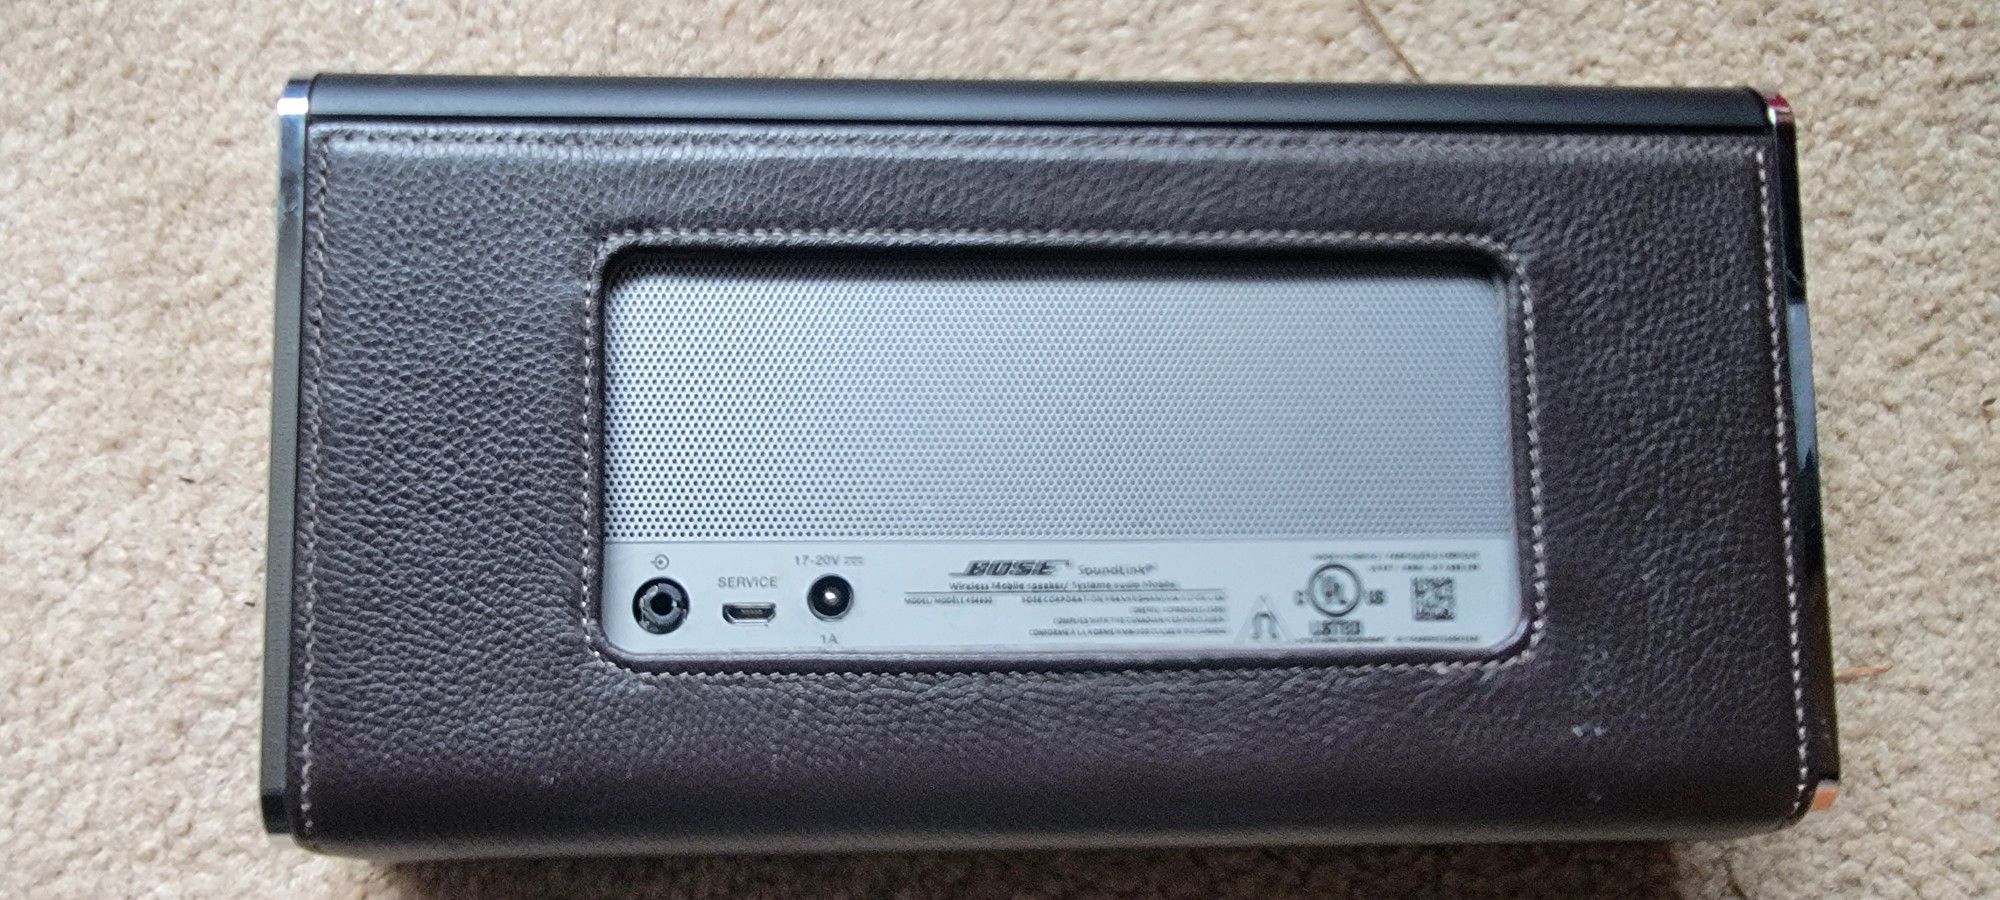 Bose Soundlink II Bluetooth Speaker With Adapter. Pick Up Only 